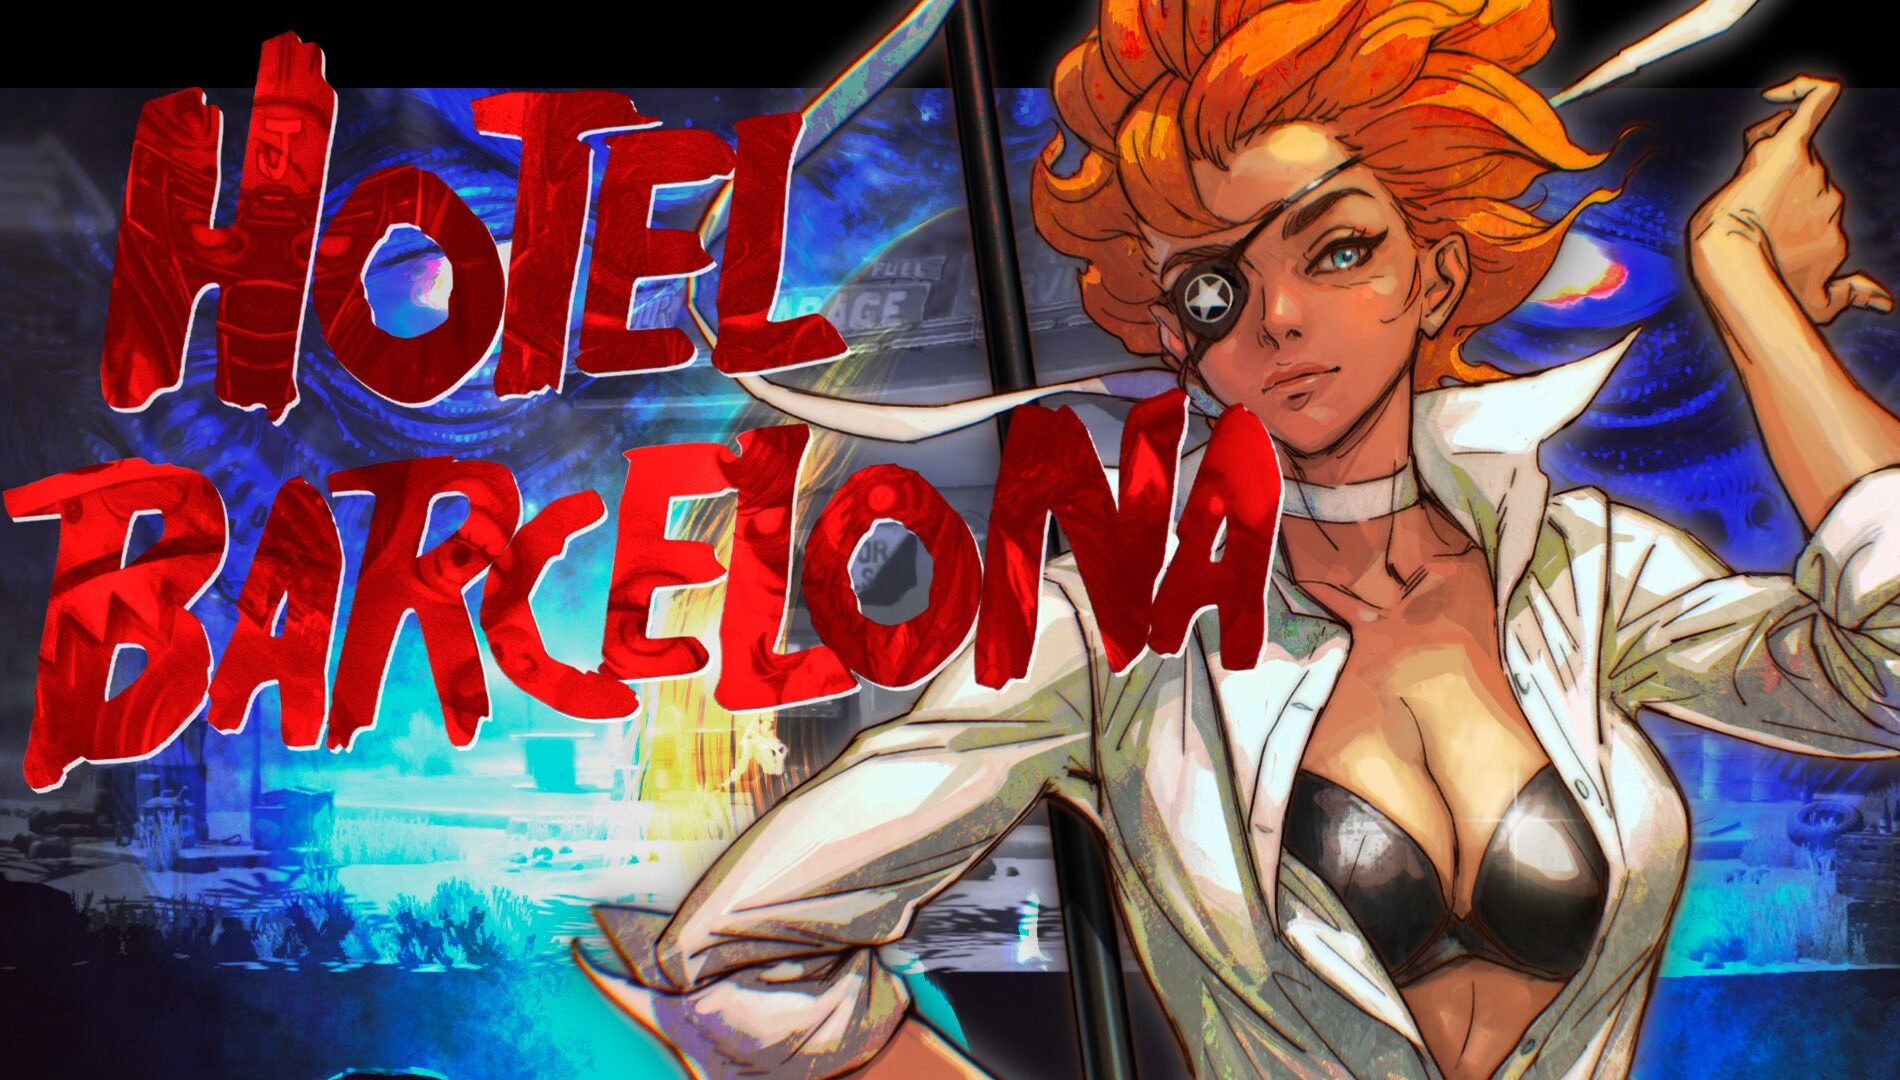 The key art for Hotel Barcelona. It shows the game's logo and a woman. The woman has short orange hair, an eye patch, and a black bra under her open white button-down shirt.